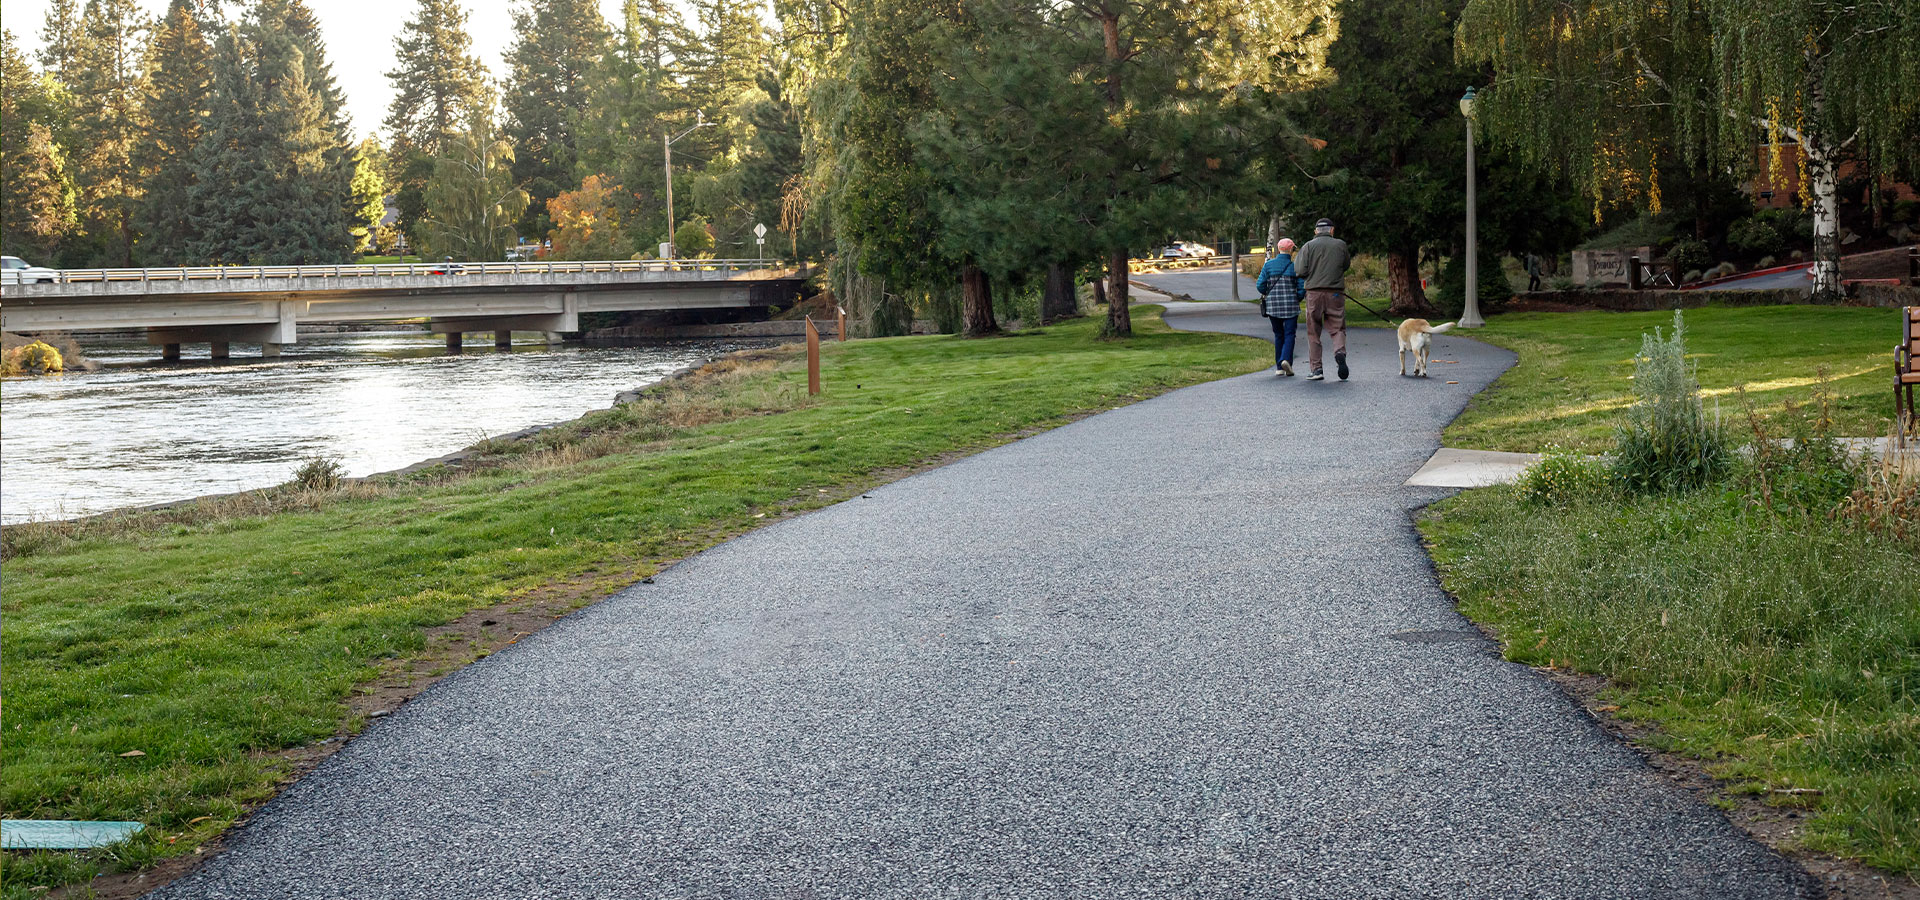 Couple with their dog walk on the asphalt path at Pacific Park